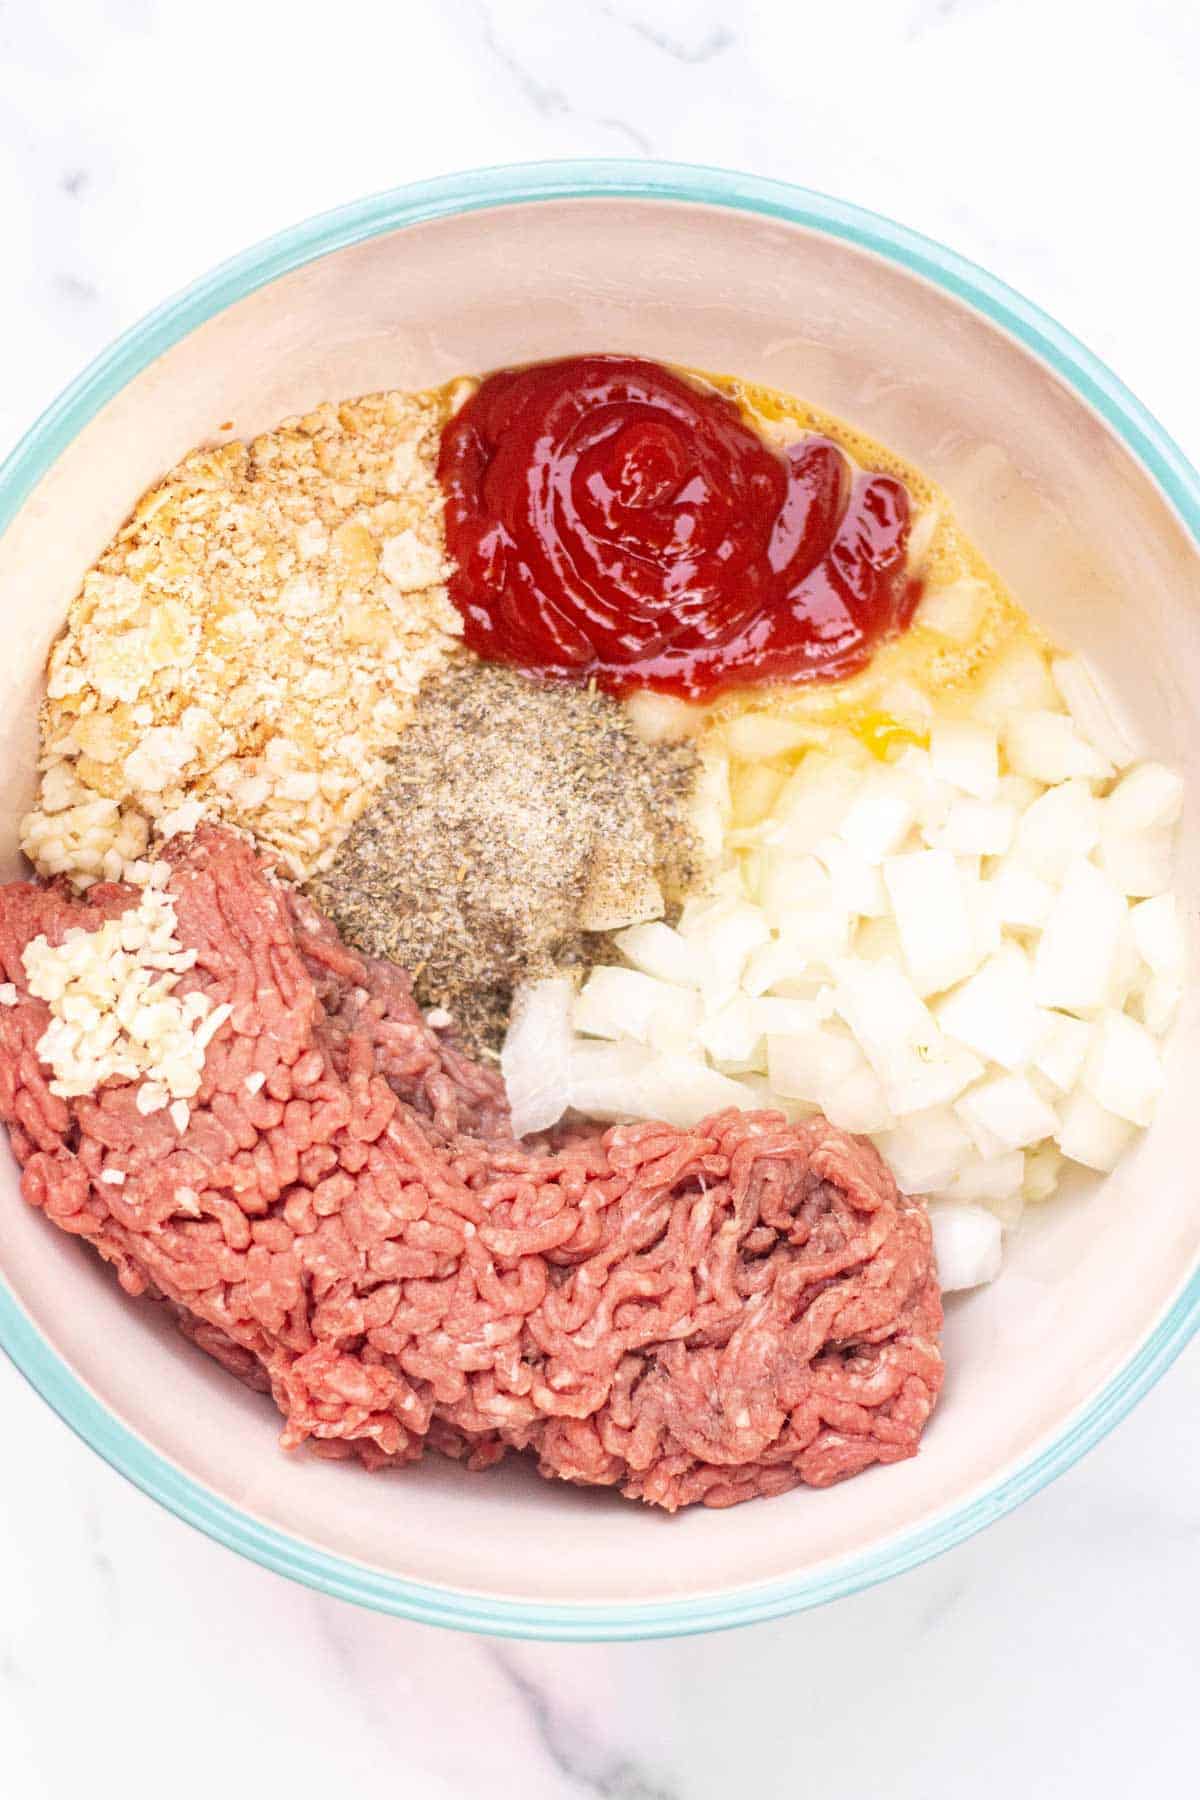 Meatloaf ingredients unmixed in a large bowl: lean ground beef, Ritz crackers crumbled, finely diced onion, minced garlic, beaten eggs, milk, ketchup, Italian seasoning, salt, ground black pepper, and garlic powder.